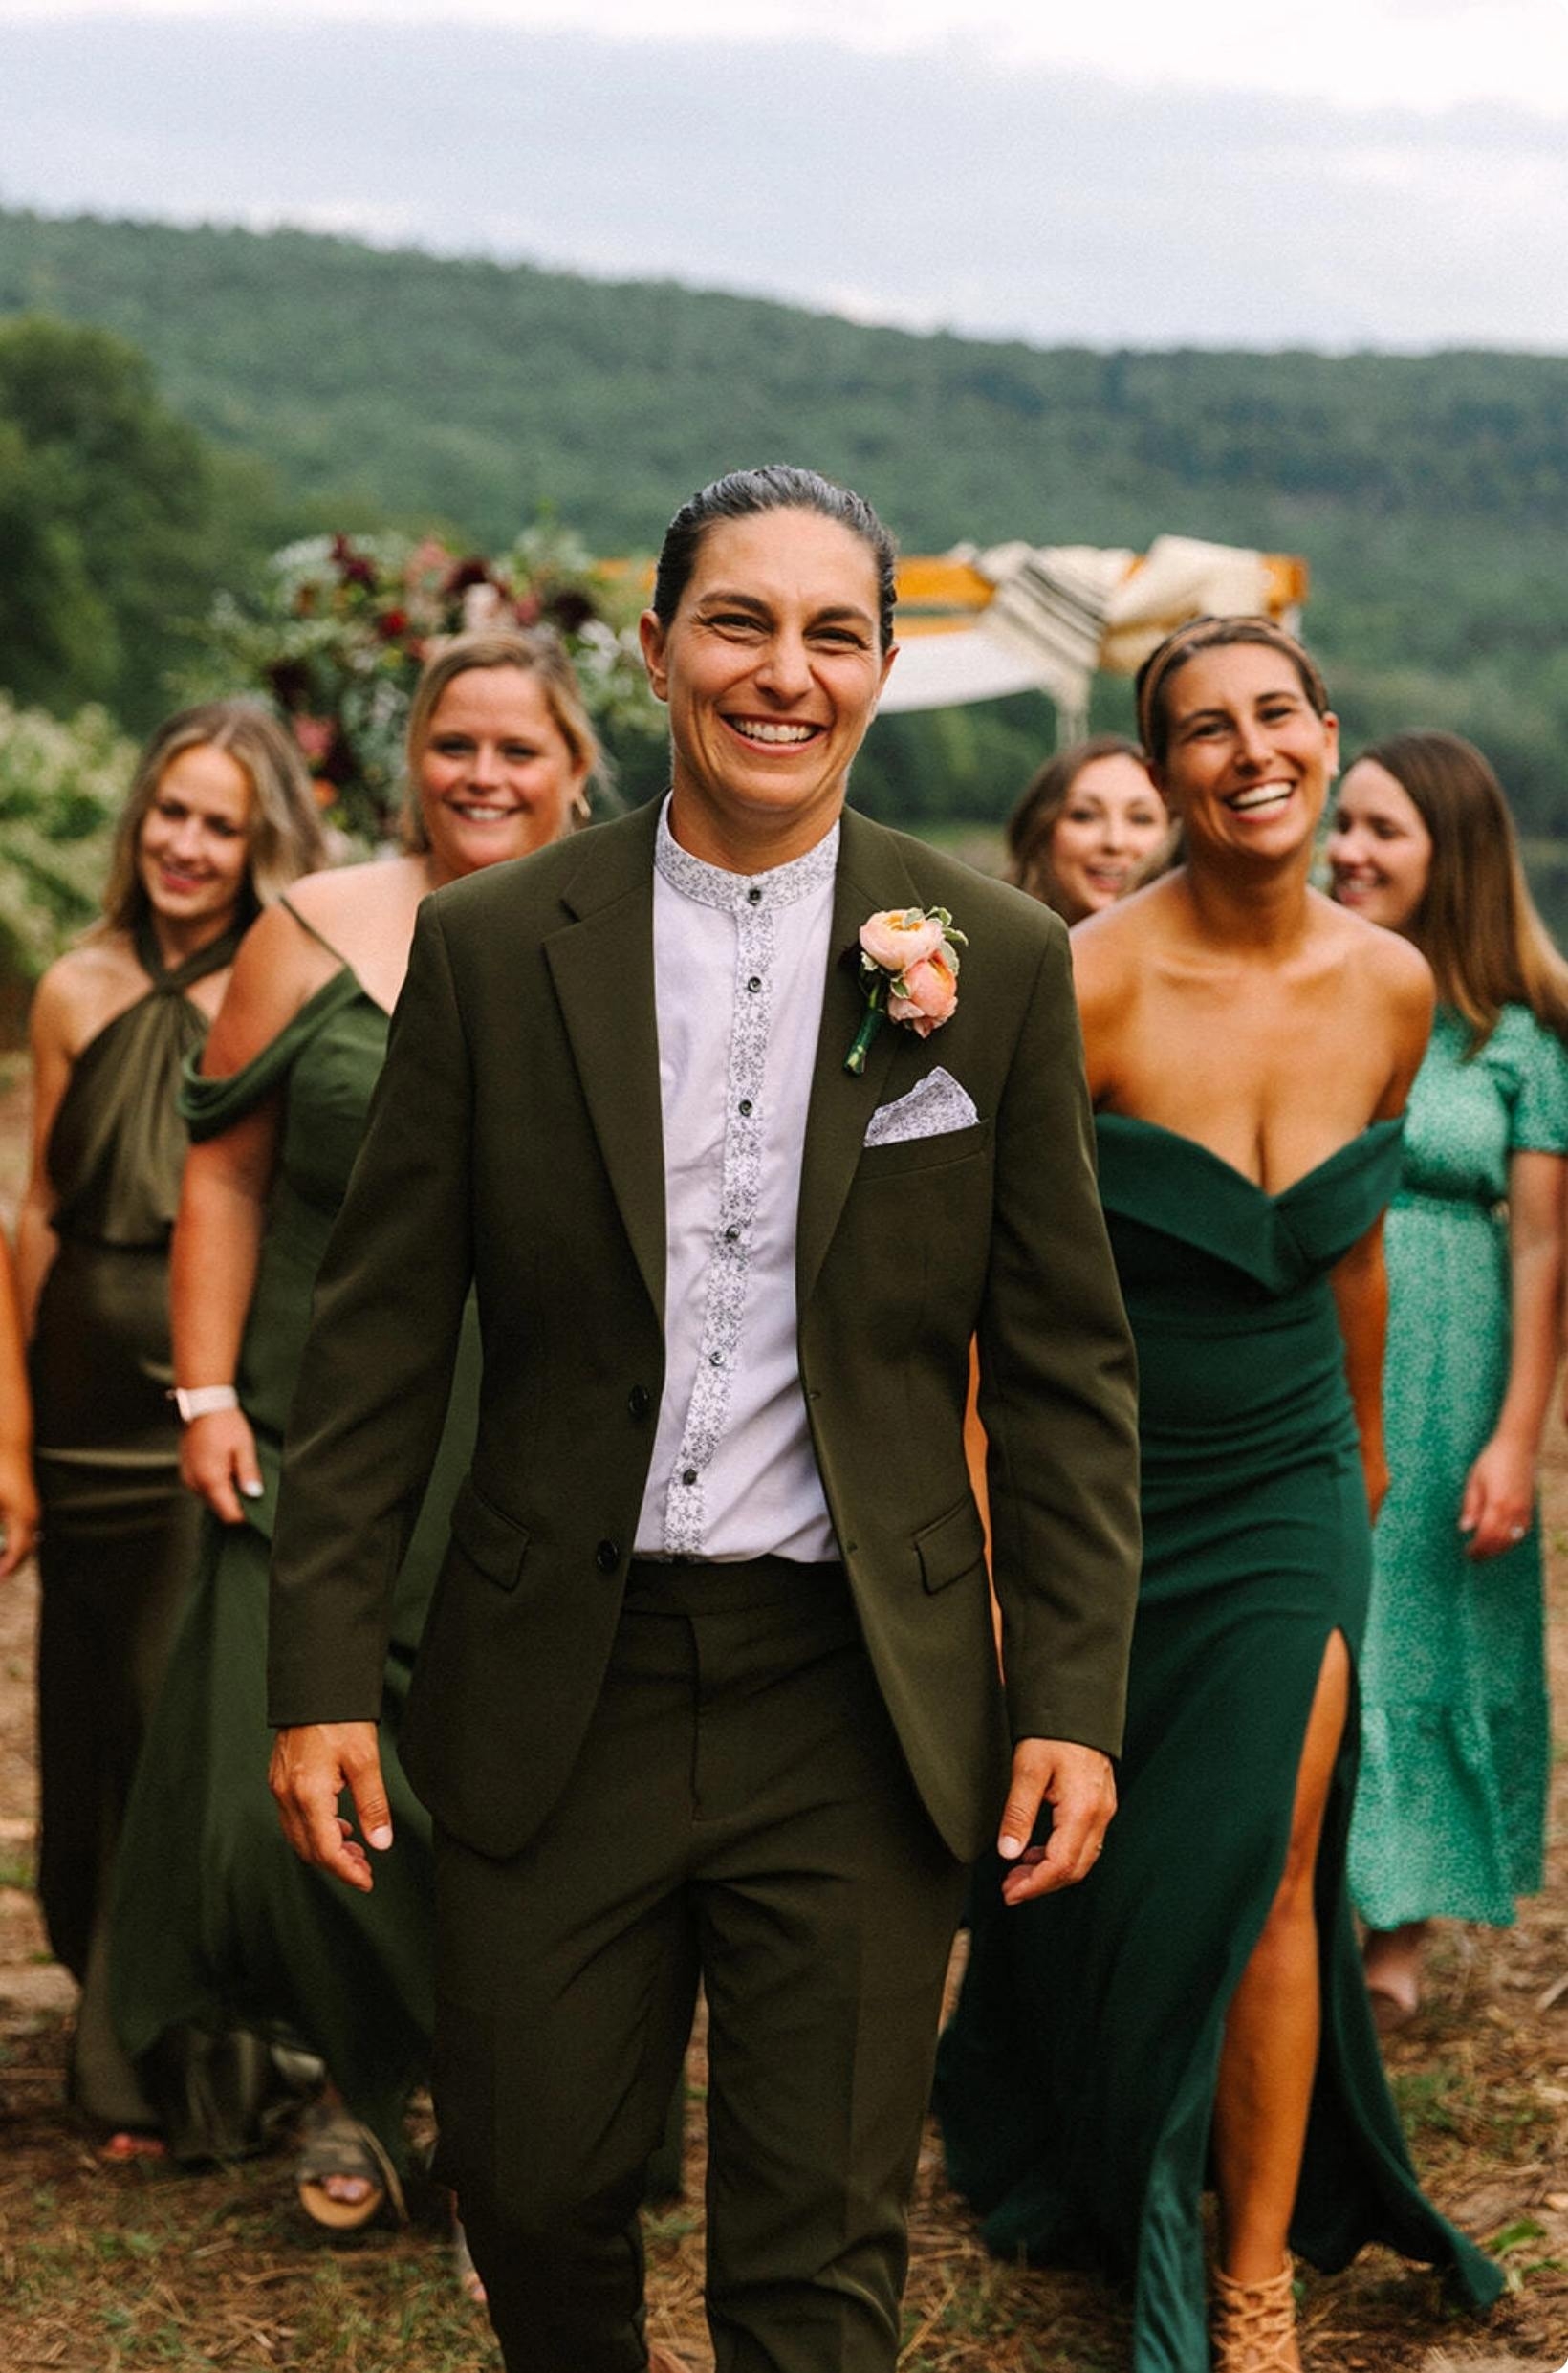 Bride wearing unique olive women's suit with collarless patterned dress shirt at outdoor wedding with green, marigold & maroon color scheme.